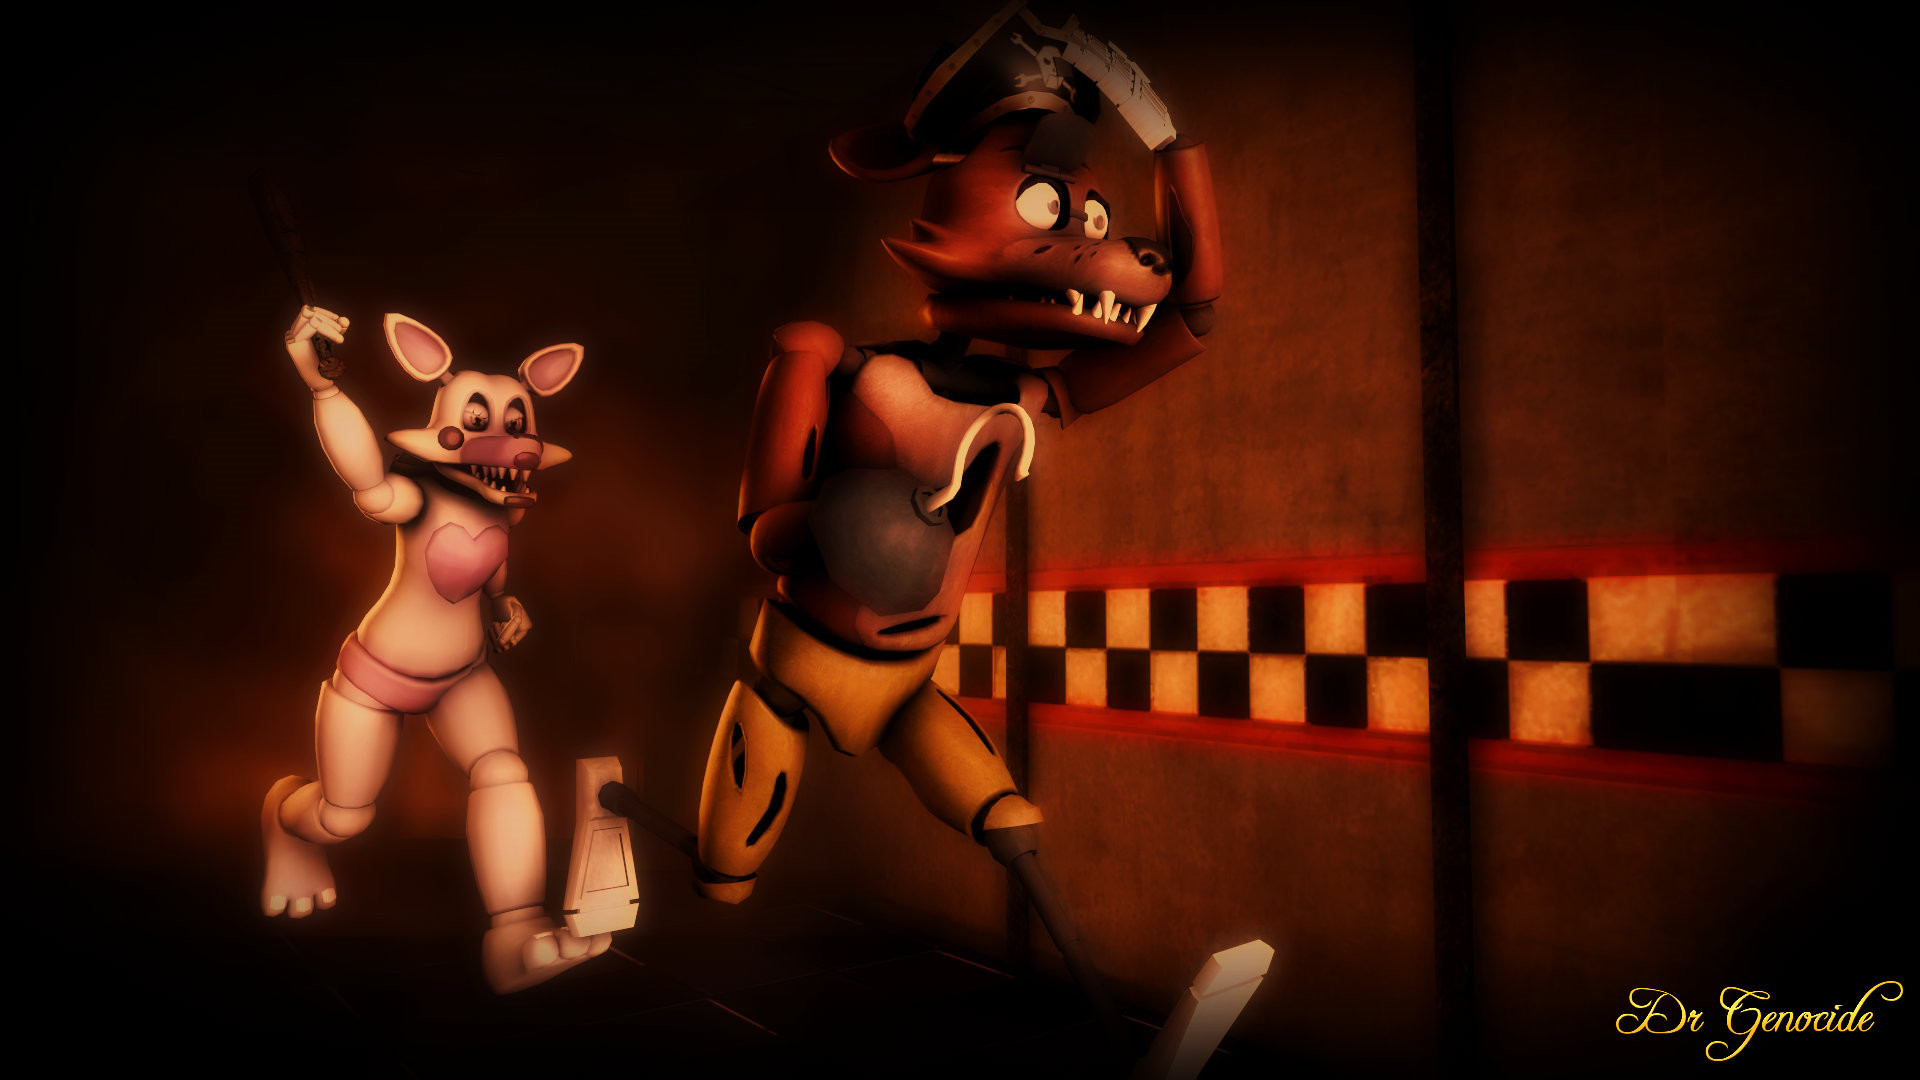 1920x1080 fnaf wallpaper foxy, 50 fnaf backgrounds collection for mobile, nmgncp